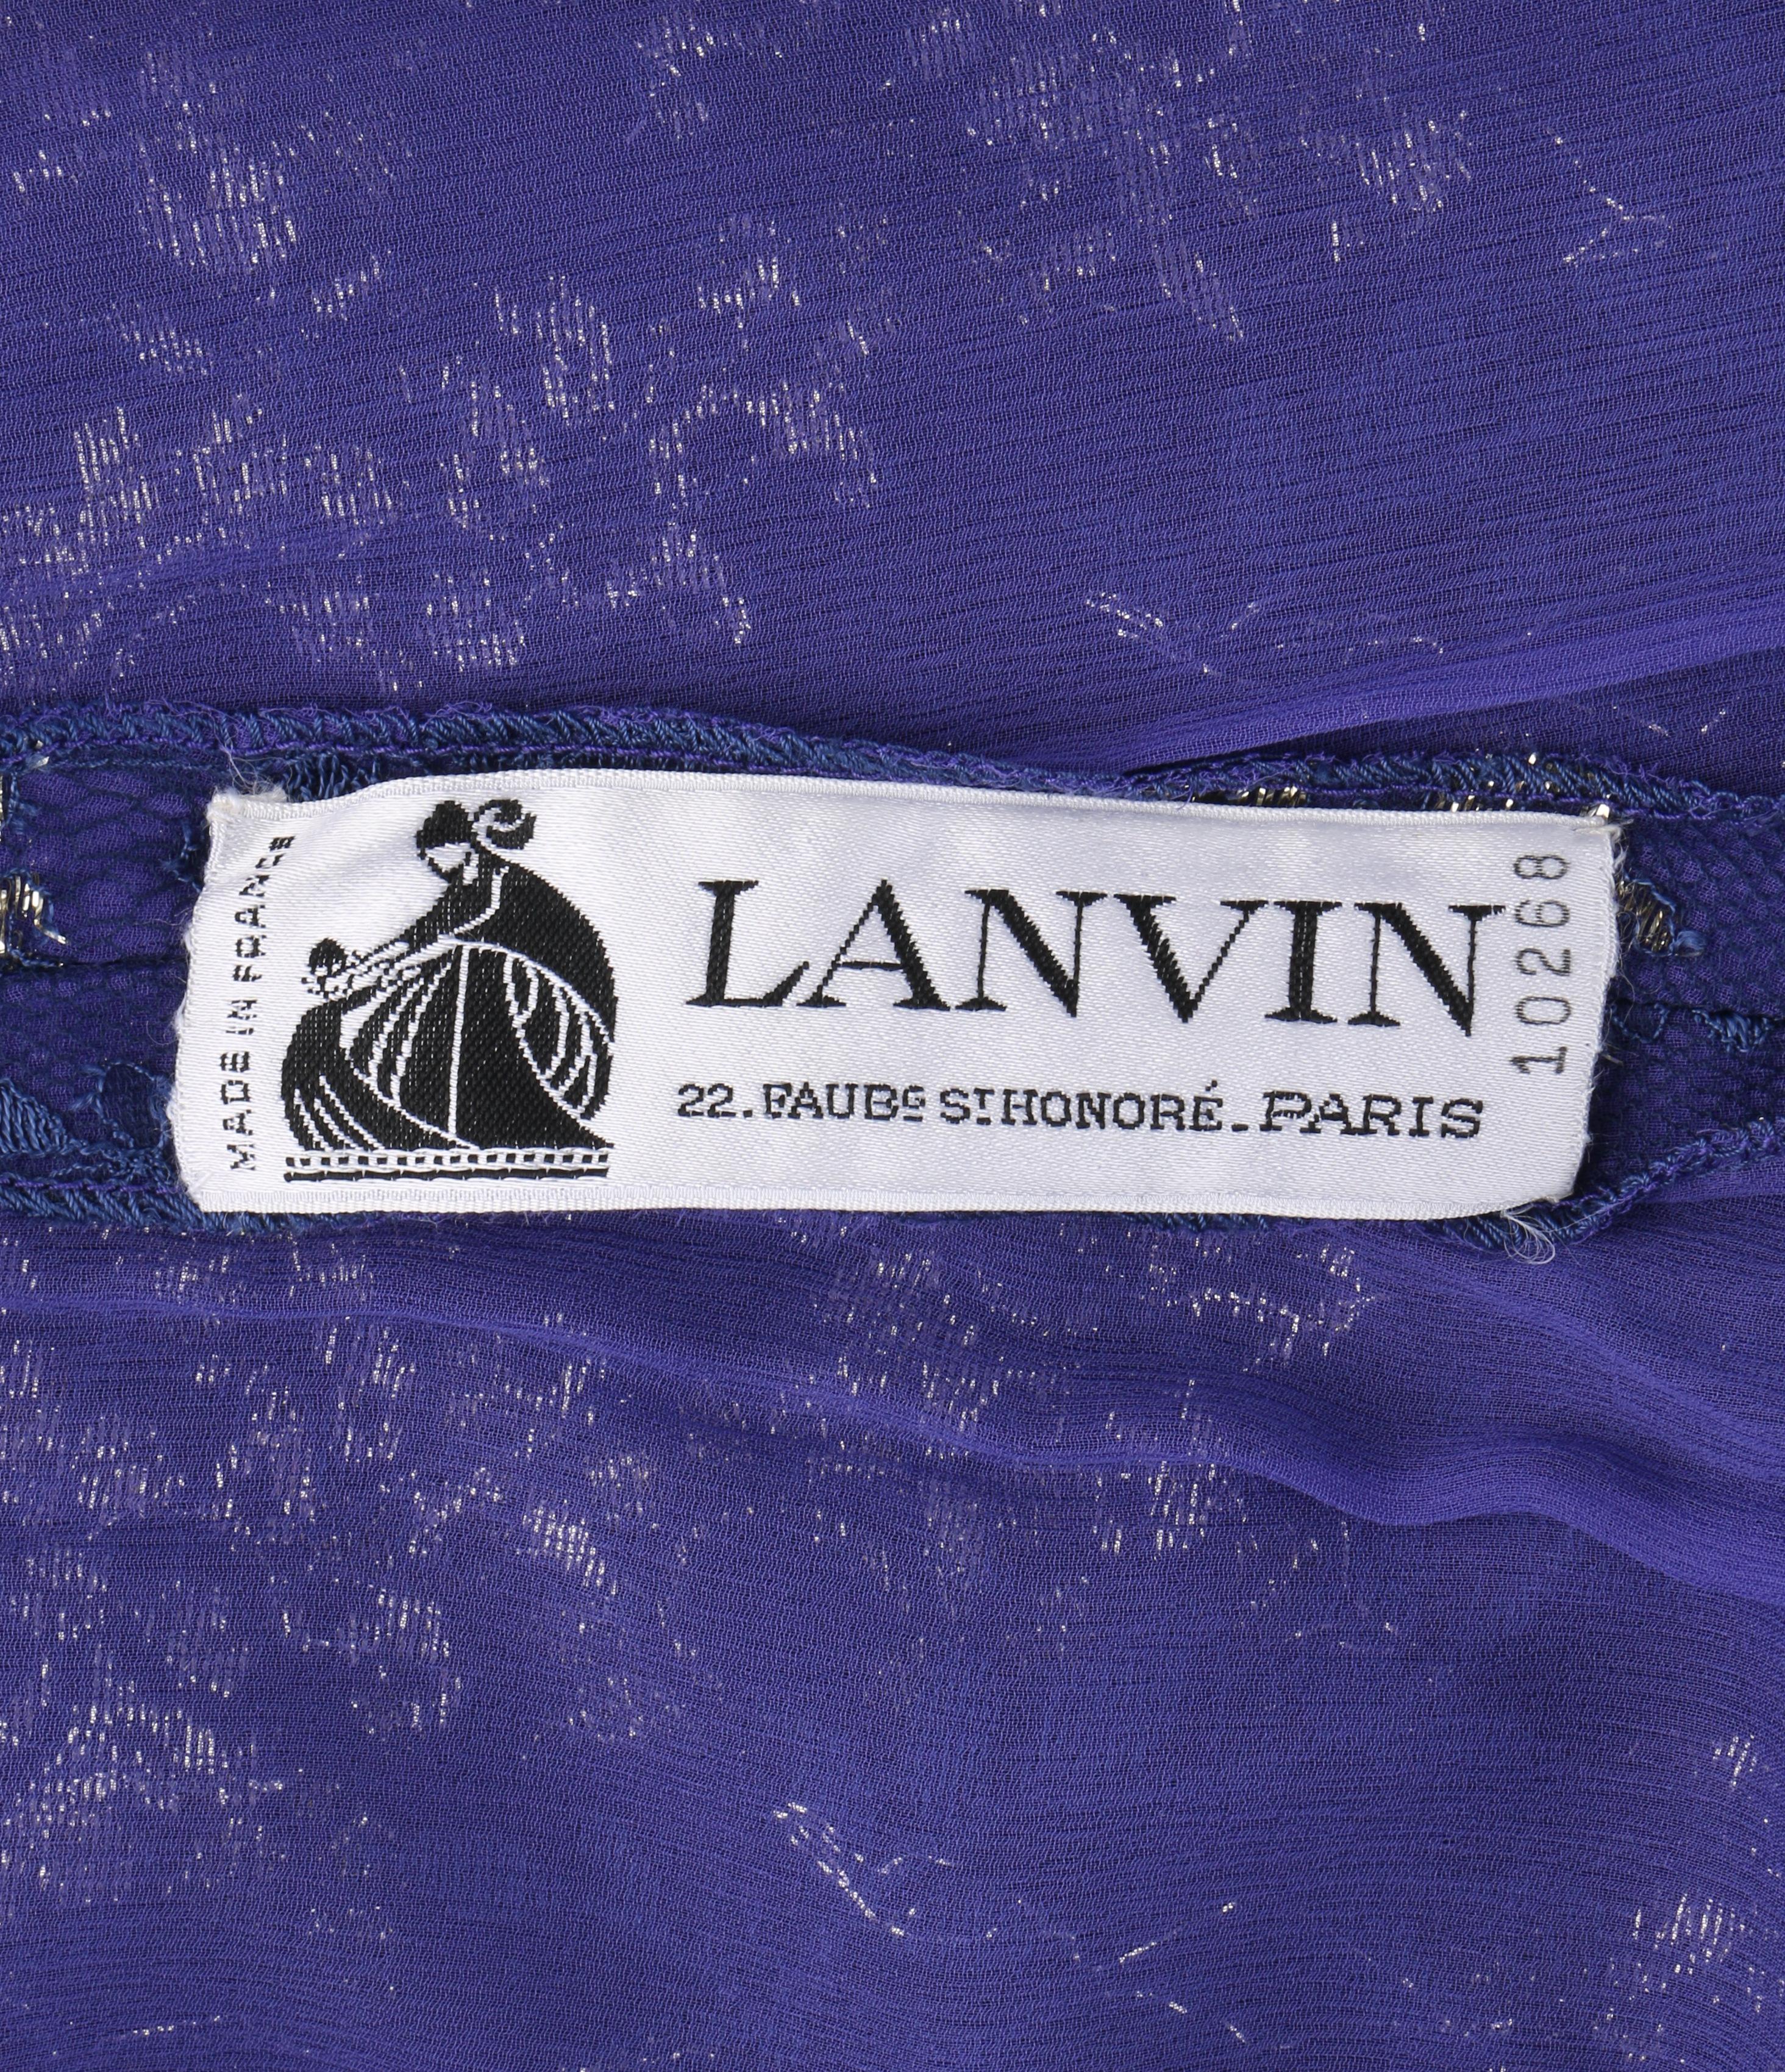 LANVIN Haute Couture c.1970s Periwinkle Gold Floral Lace Overlay Maxi Dress For Sale 2